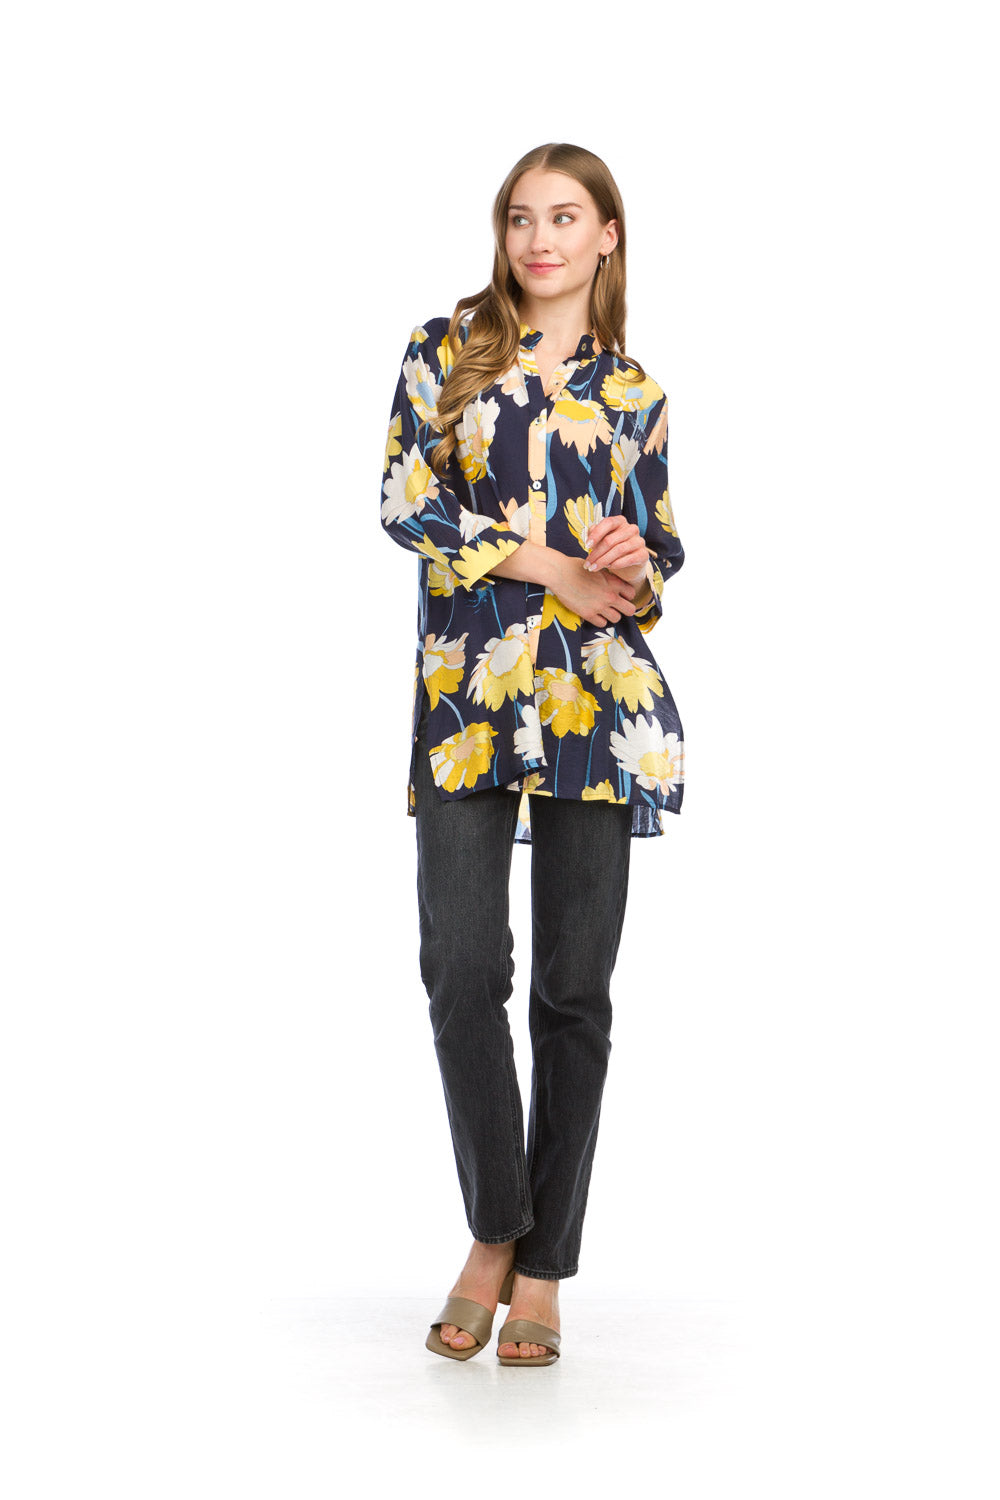 PT-16045 - FLORAL PIN TUCK BUTTON FRONT TOP